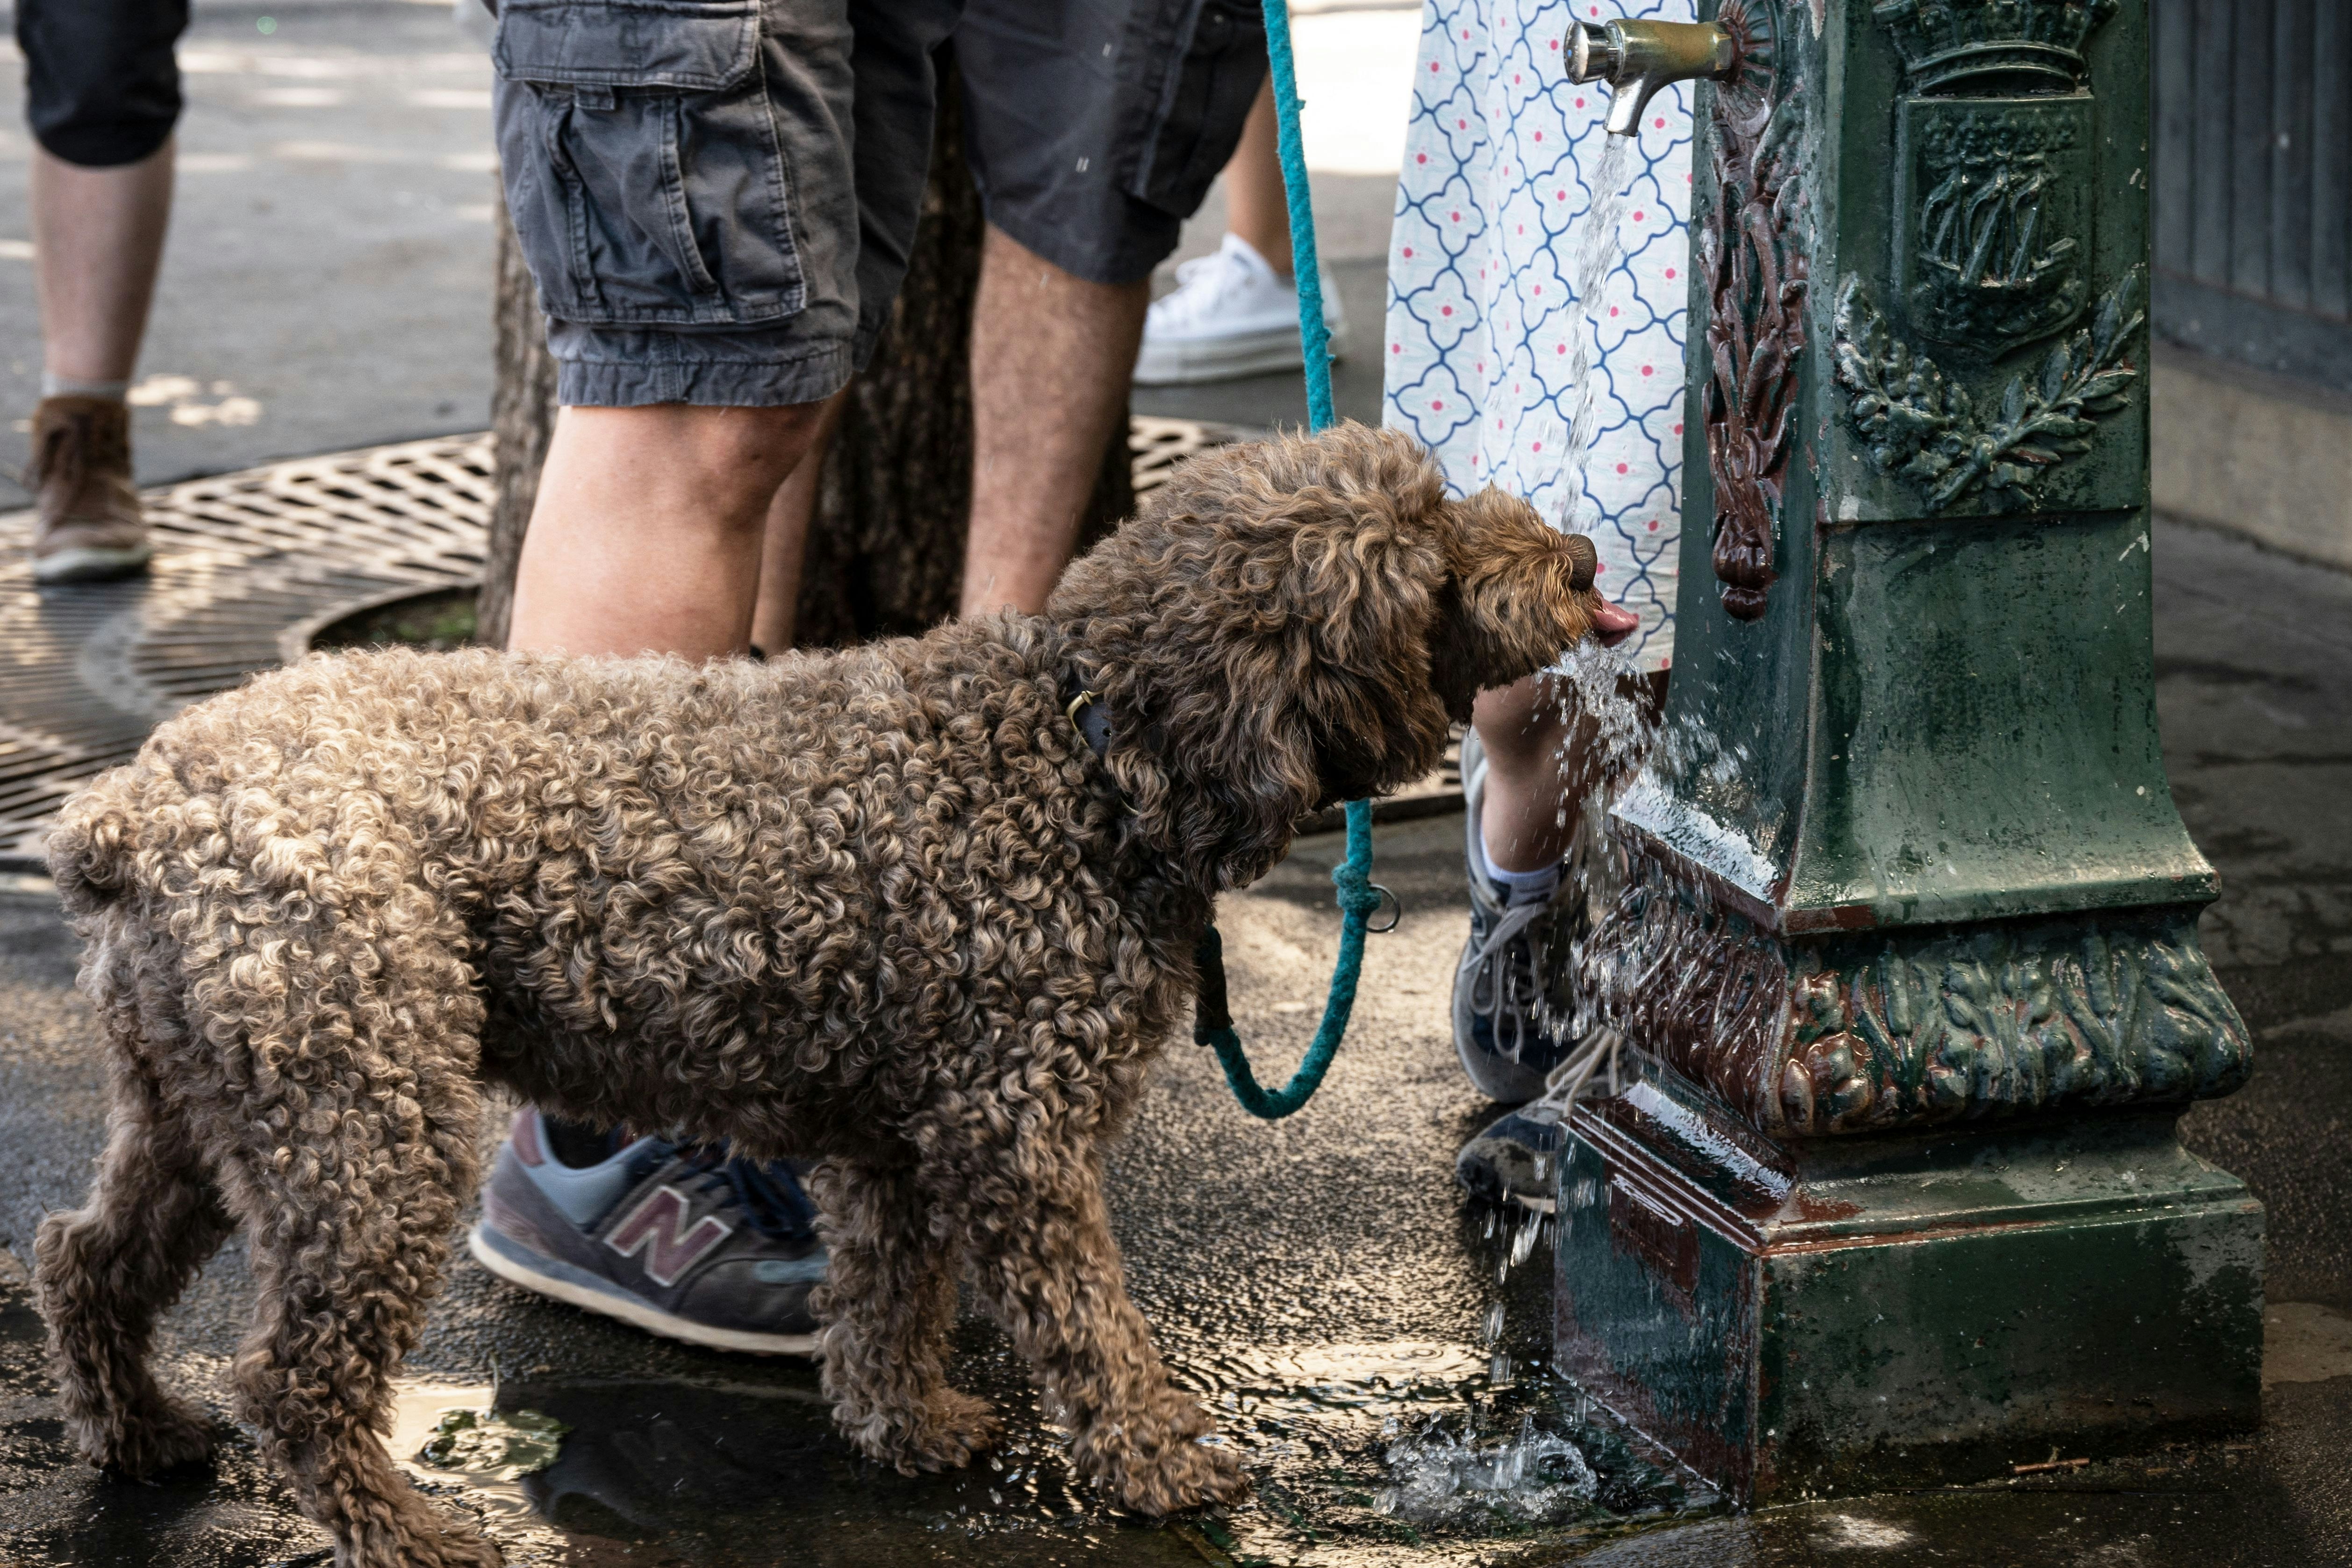 A dog drinks from a fountain in Paris on July 13, 2022. - After Spain and Portugal, France is witnessing a second heatwave in less than a month, "a sign of climate change and hotter summers to come where 35 degrees will be the norm" said the French weather broadcast company Meteo France. (Photo by BERTRAND GUAY / AFP) (Photo by BERTRAND GUAY/AFP via Getty Images)